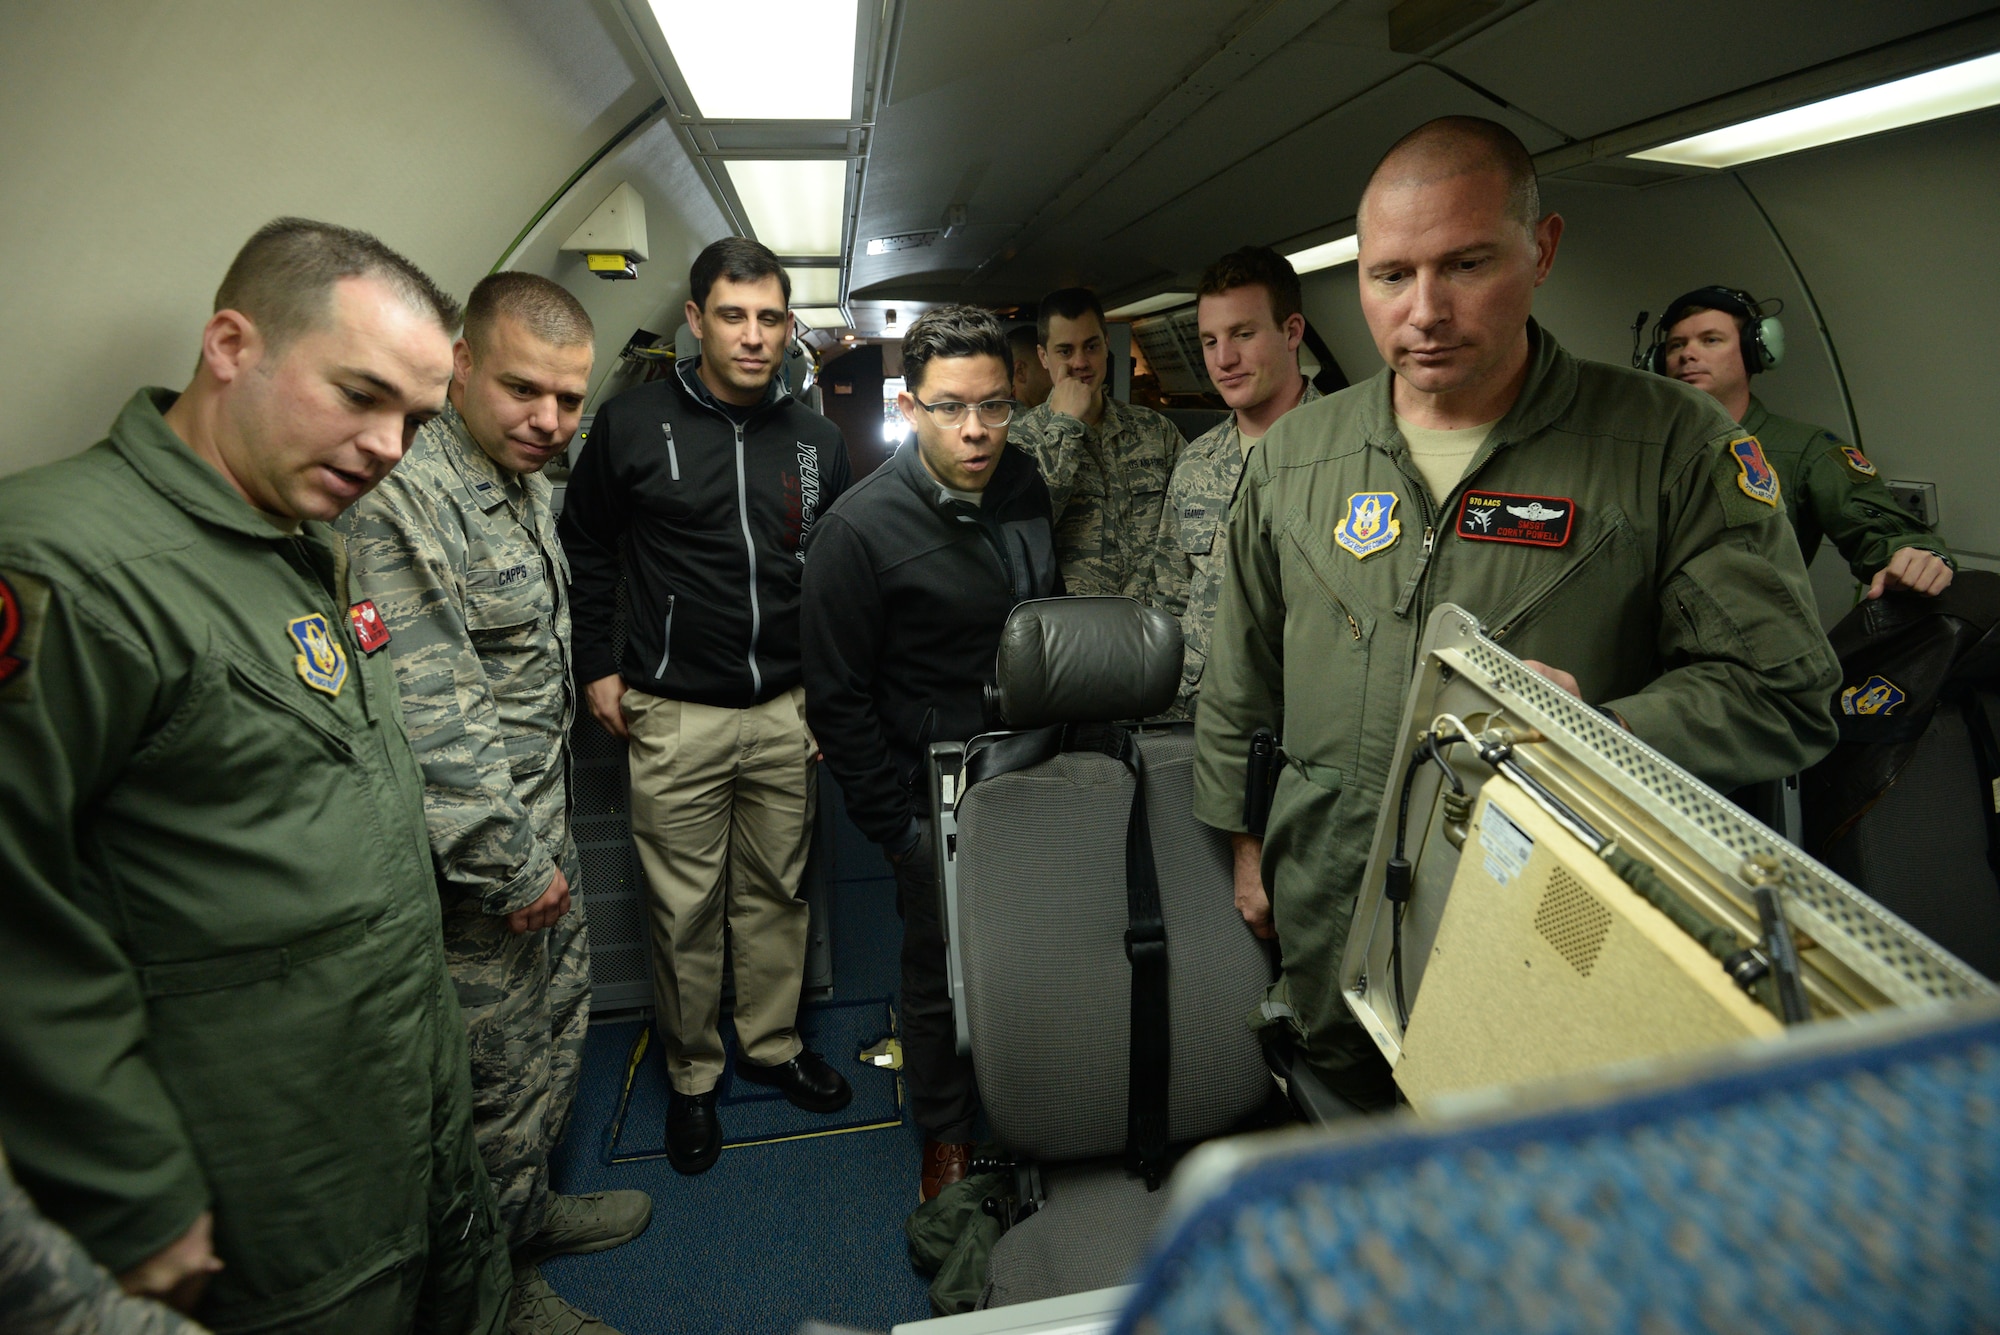 Senior Master Sgts. Malachi Sturlin (left) and Courtney Powell (right), computer and display maintenance technicians assigned to the 970th Airborne Air Control Squadron, showcase upgraded computer hardware on board an E-3G Sentry Block 40/45 to program managers on July 18 during a training mission. The 513th Air Control Group invited eight program managers on board to see the product of their work and to discuss future improvements to the Airborne Warning and Control System aircraft. (U.S. Air Force photo by Staff Sgt. Caleb Wanzer)